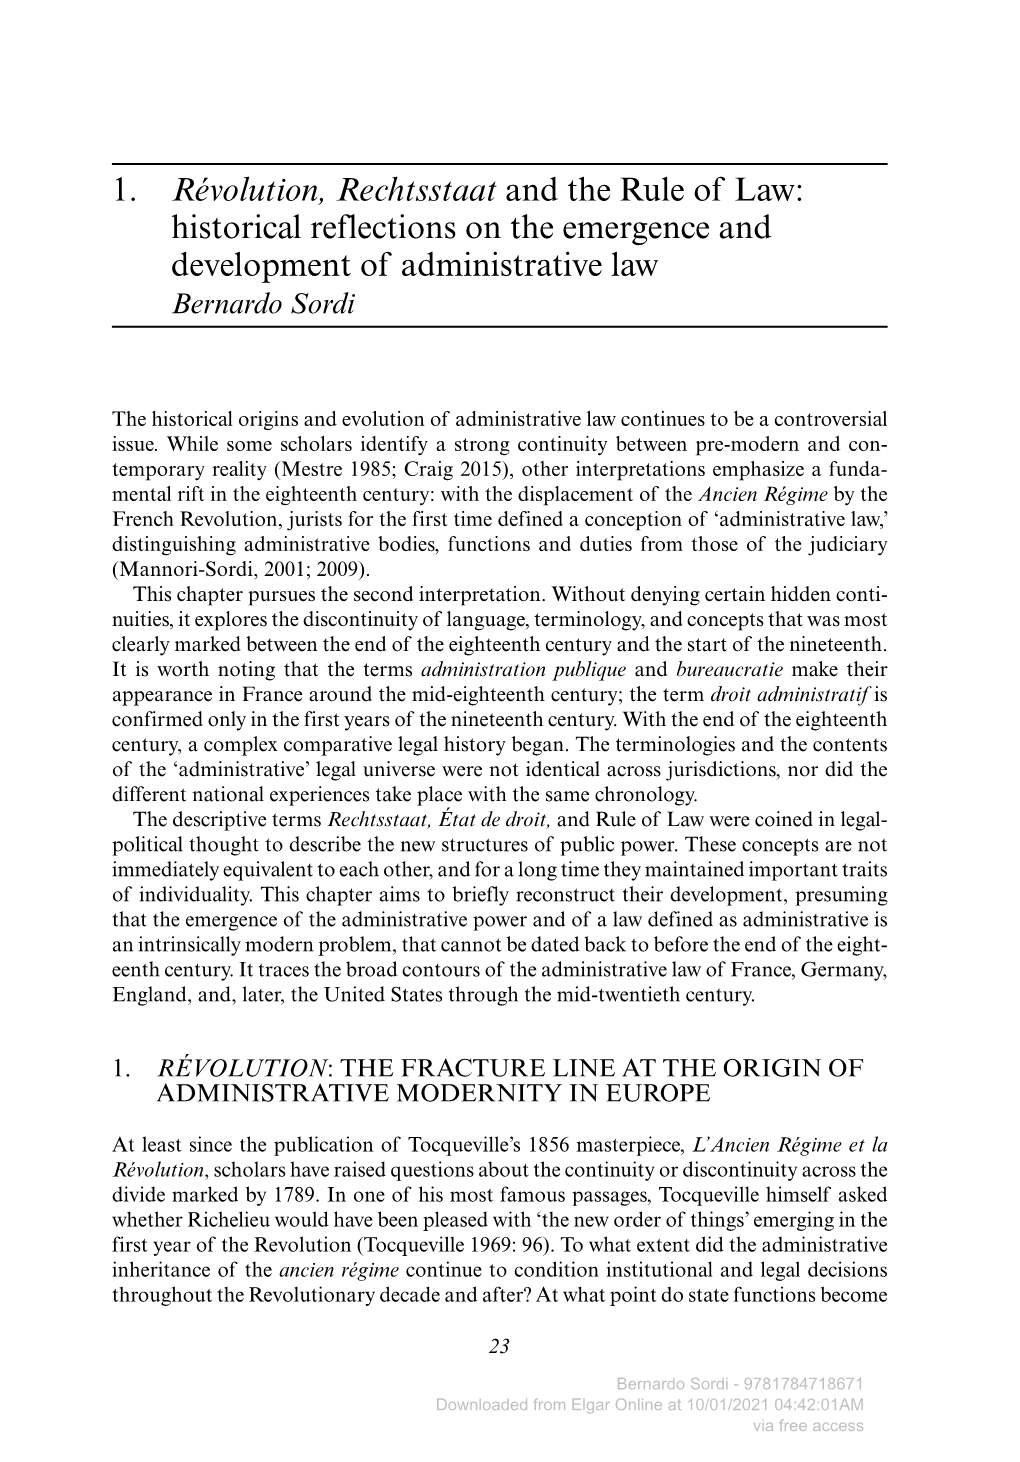 Historical Reflections on the Emergence and Development of Administrative Law Bernardo Sordi